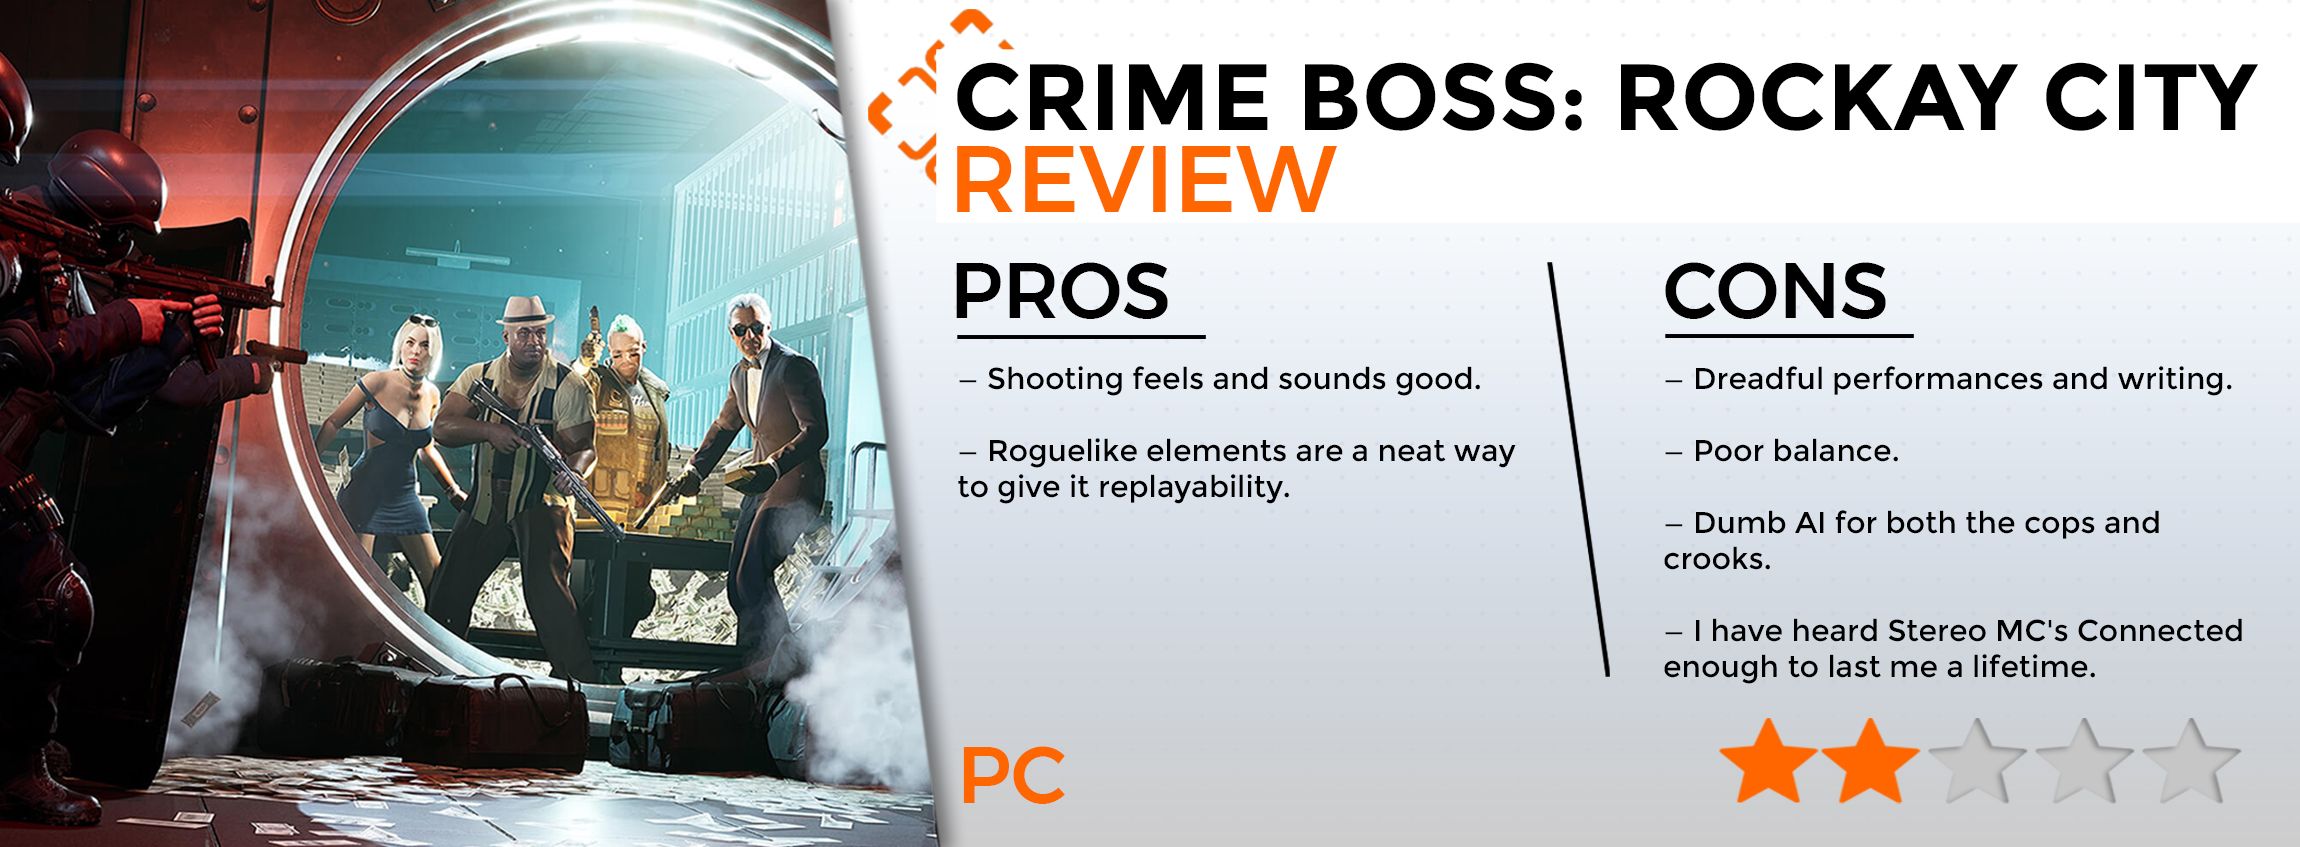 Crime Boss Rockay City Review - summary - 2 star review